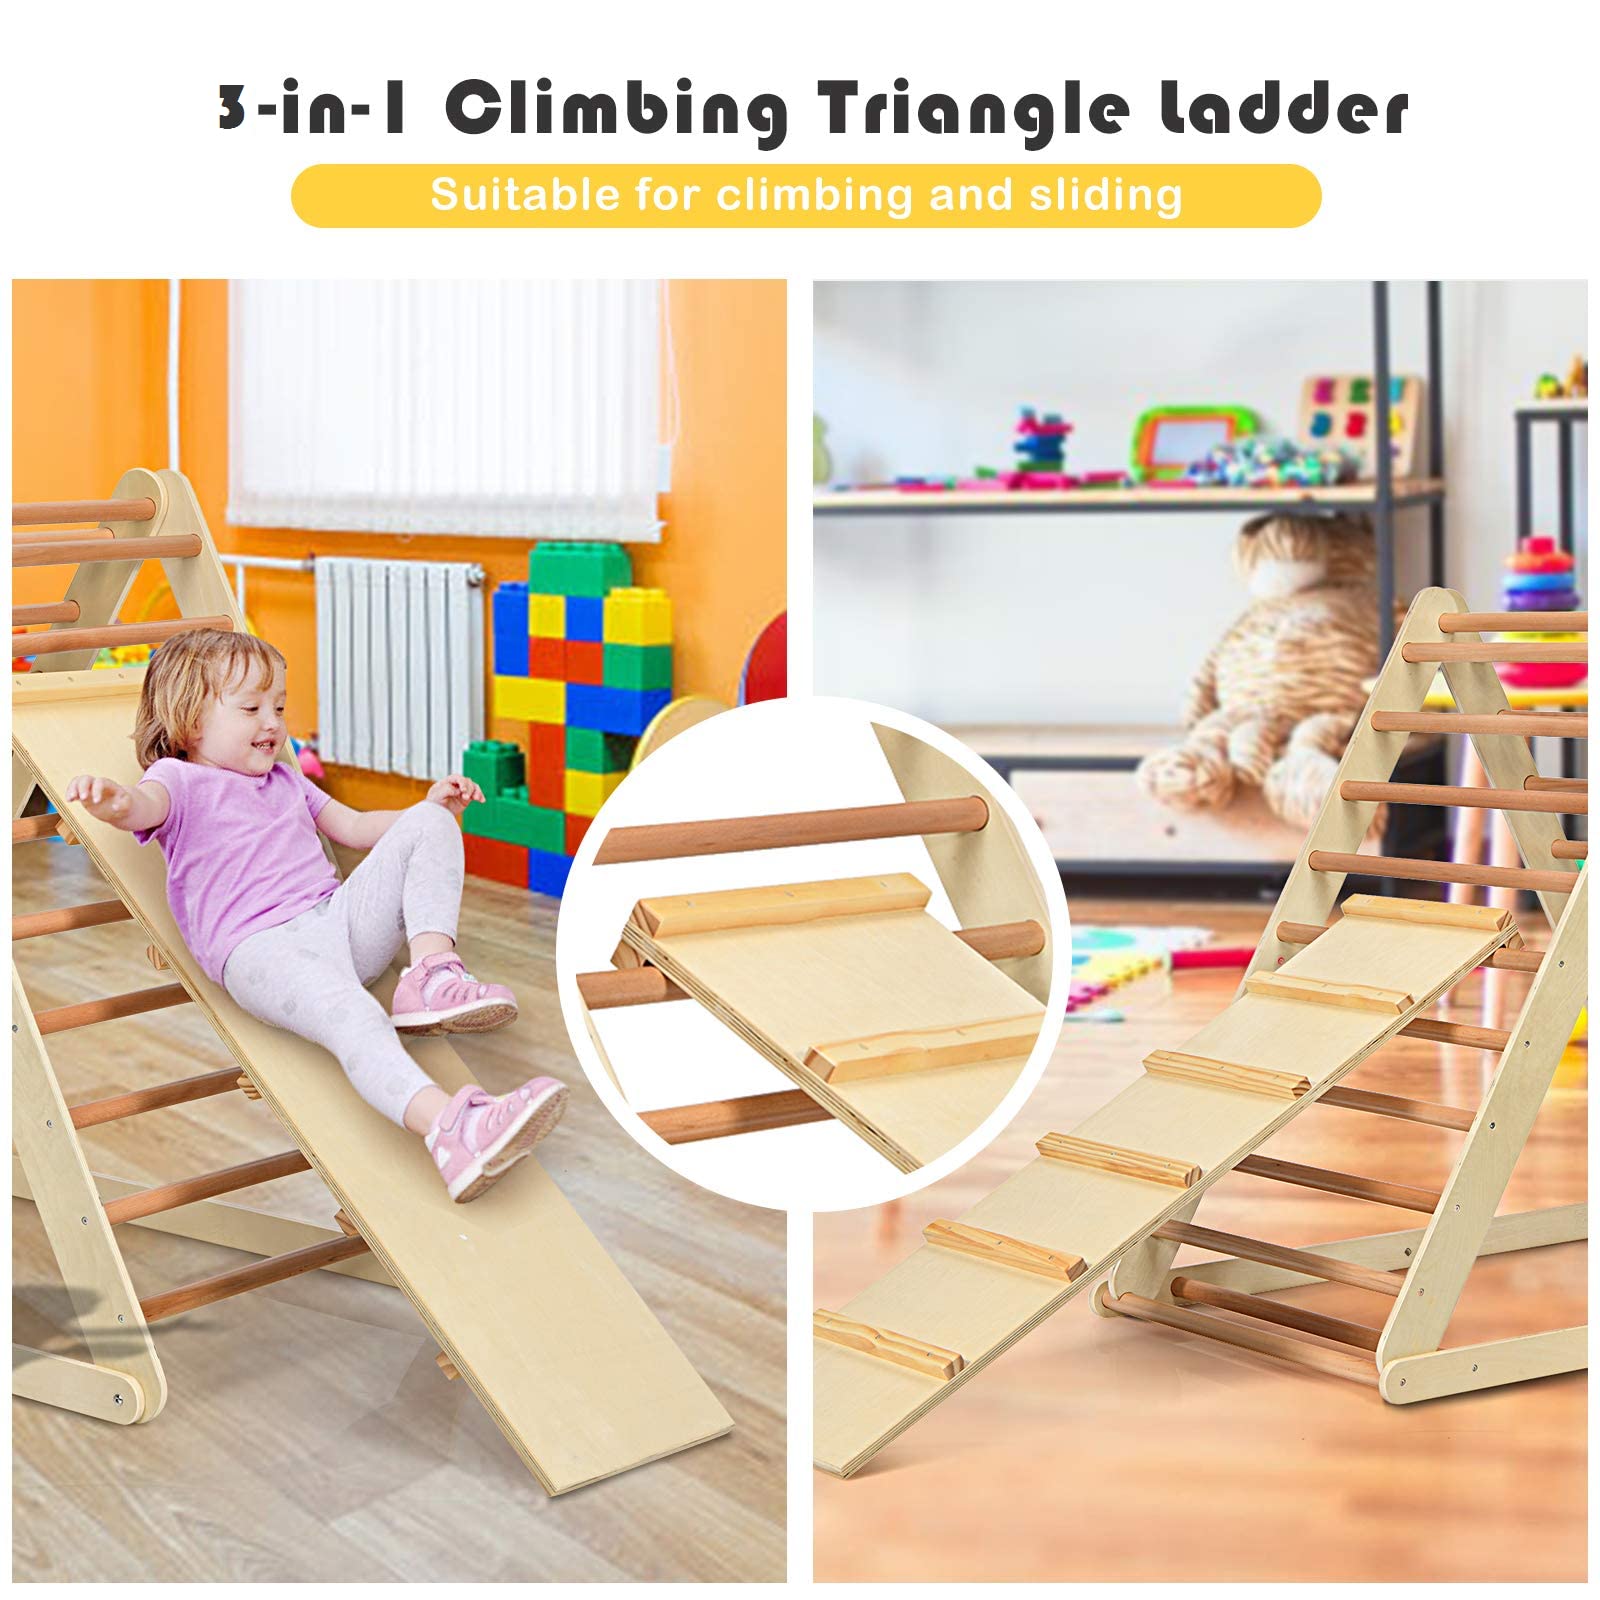 Costzon Foldable Triangle Climber with Reversible Ramp, 3 in 1 Climbing Toys for Toddlers Wooden Montessori Play Gym for Sliding & Climbing, Indoor Playground Ladder for Boys Girls Gift Present